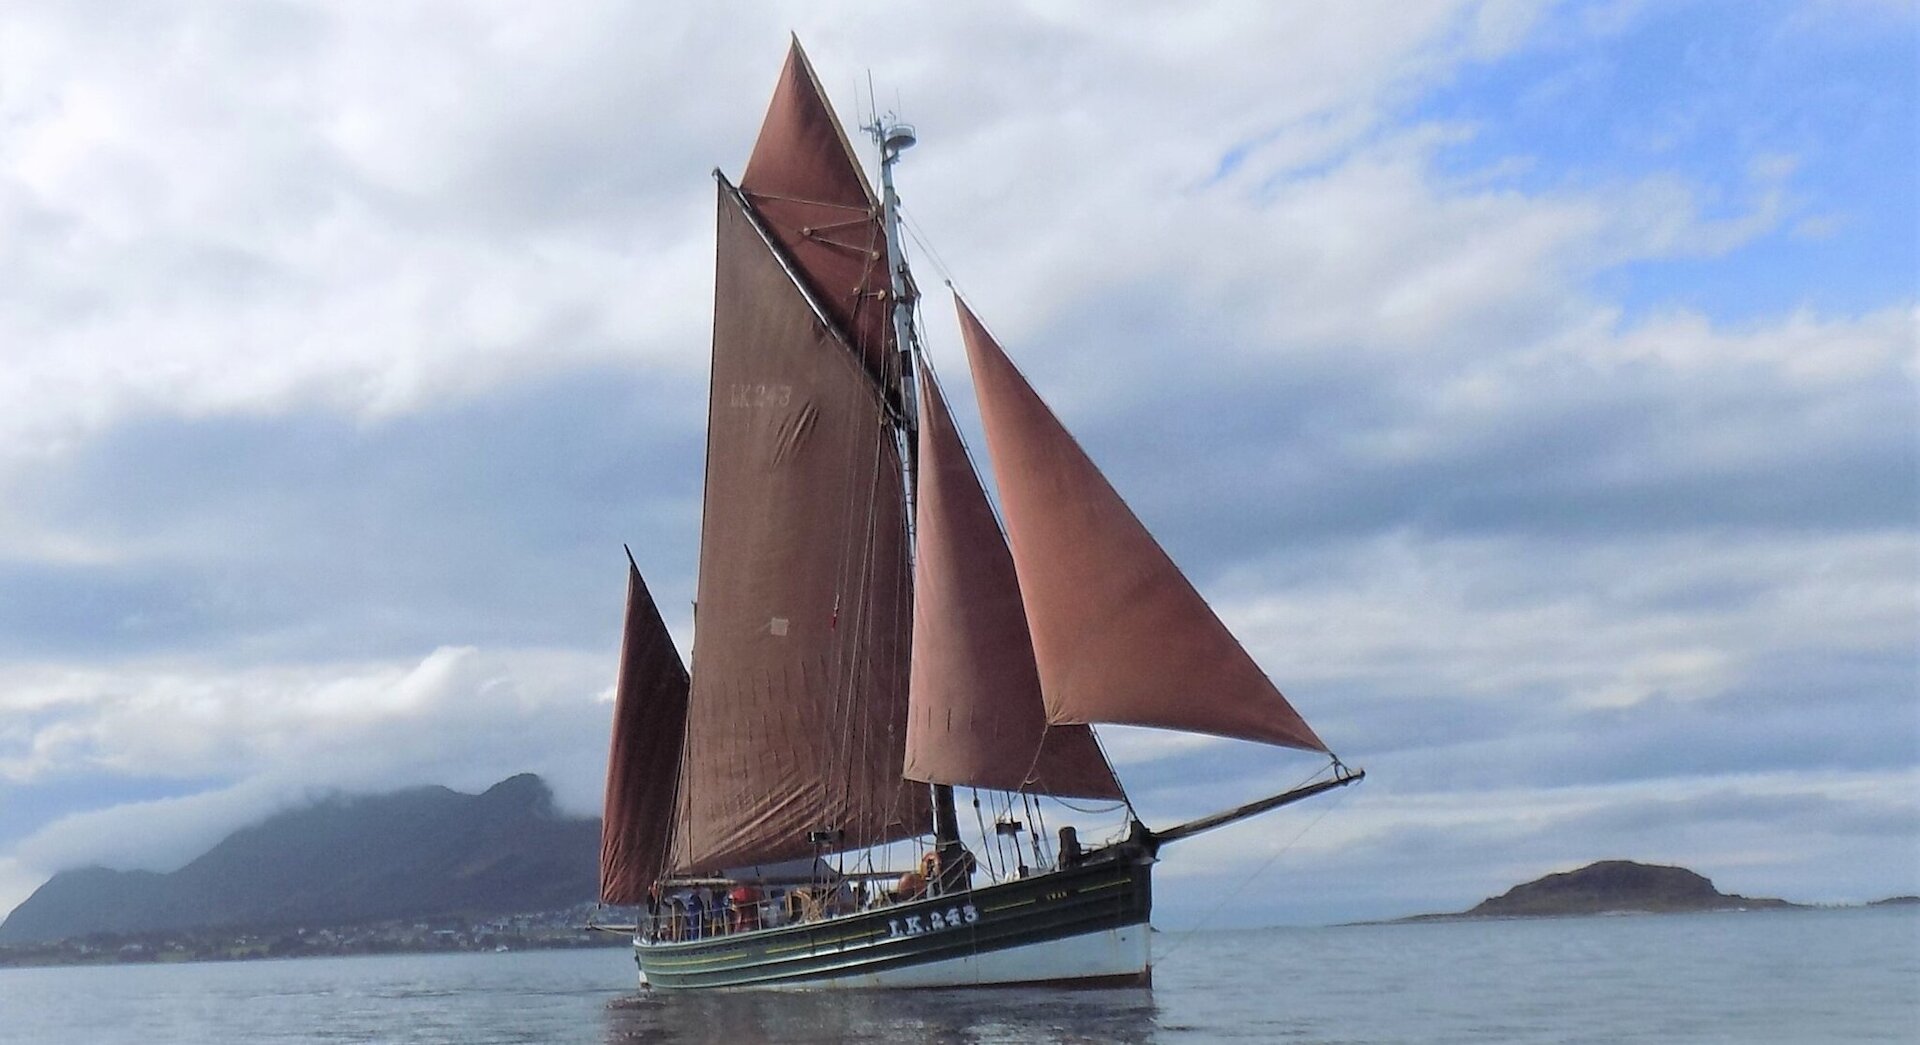 Shetland's sail training vessel the Swan is taking part in Tall Ships Races 2023, calling at her home port of Lerwick